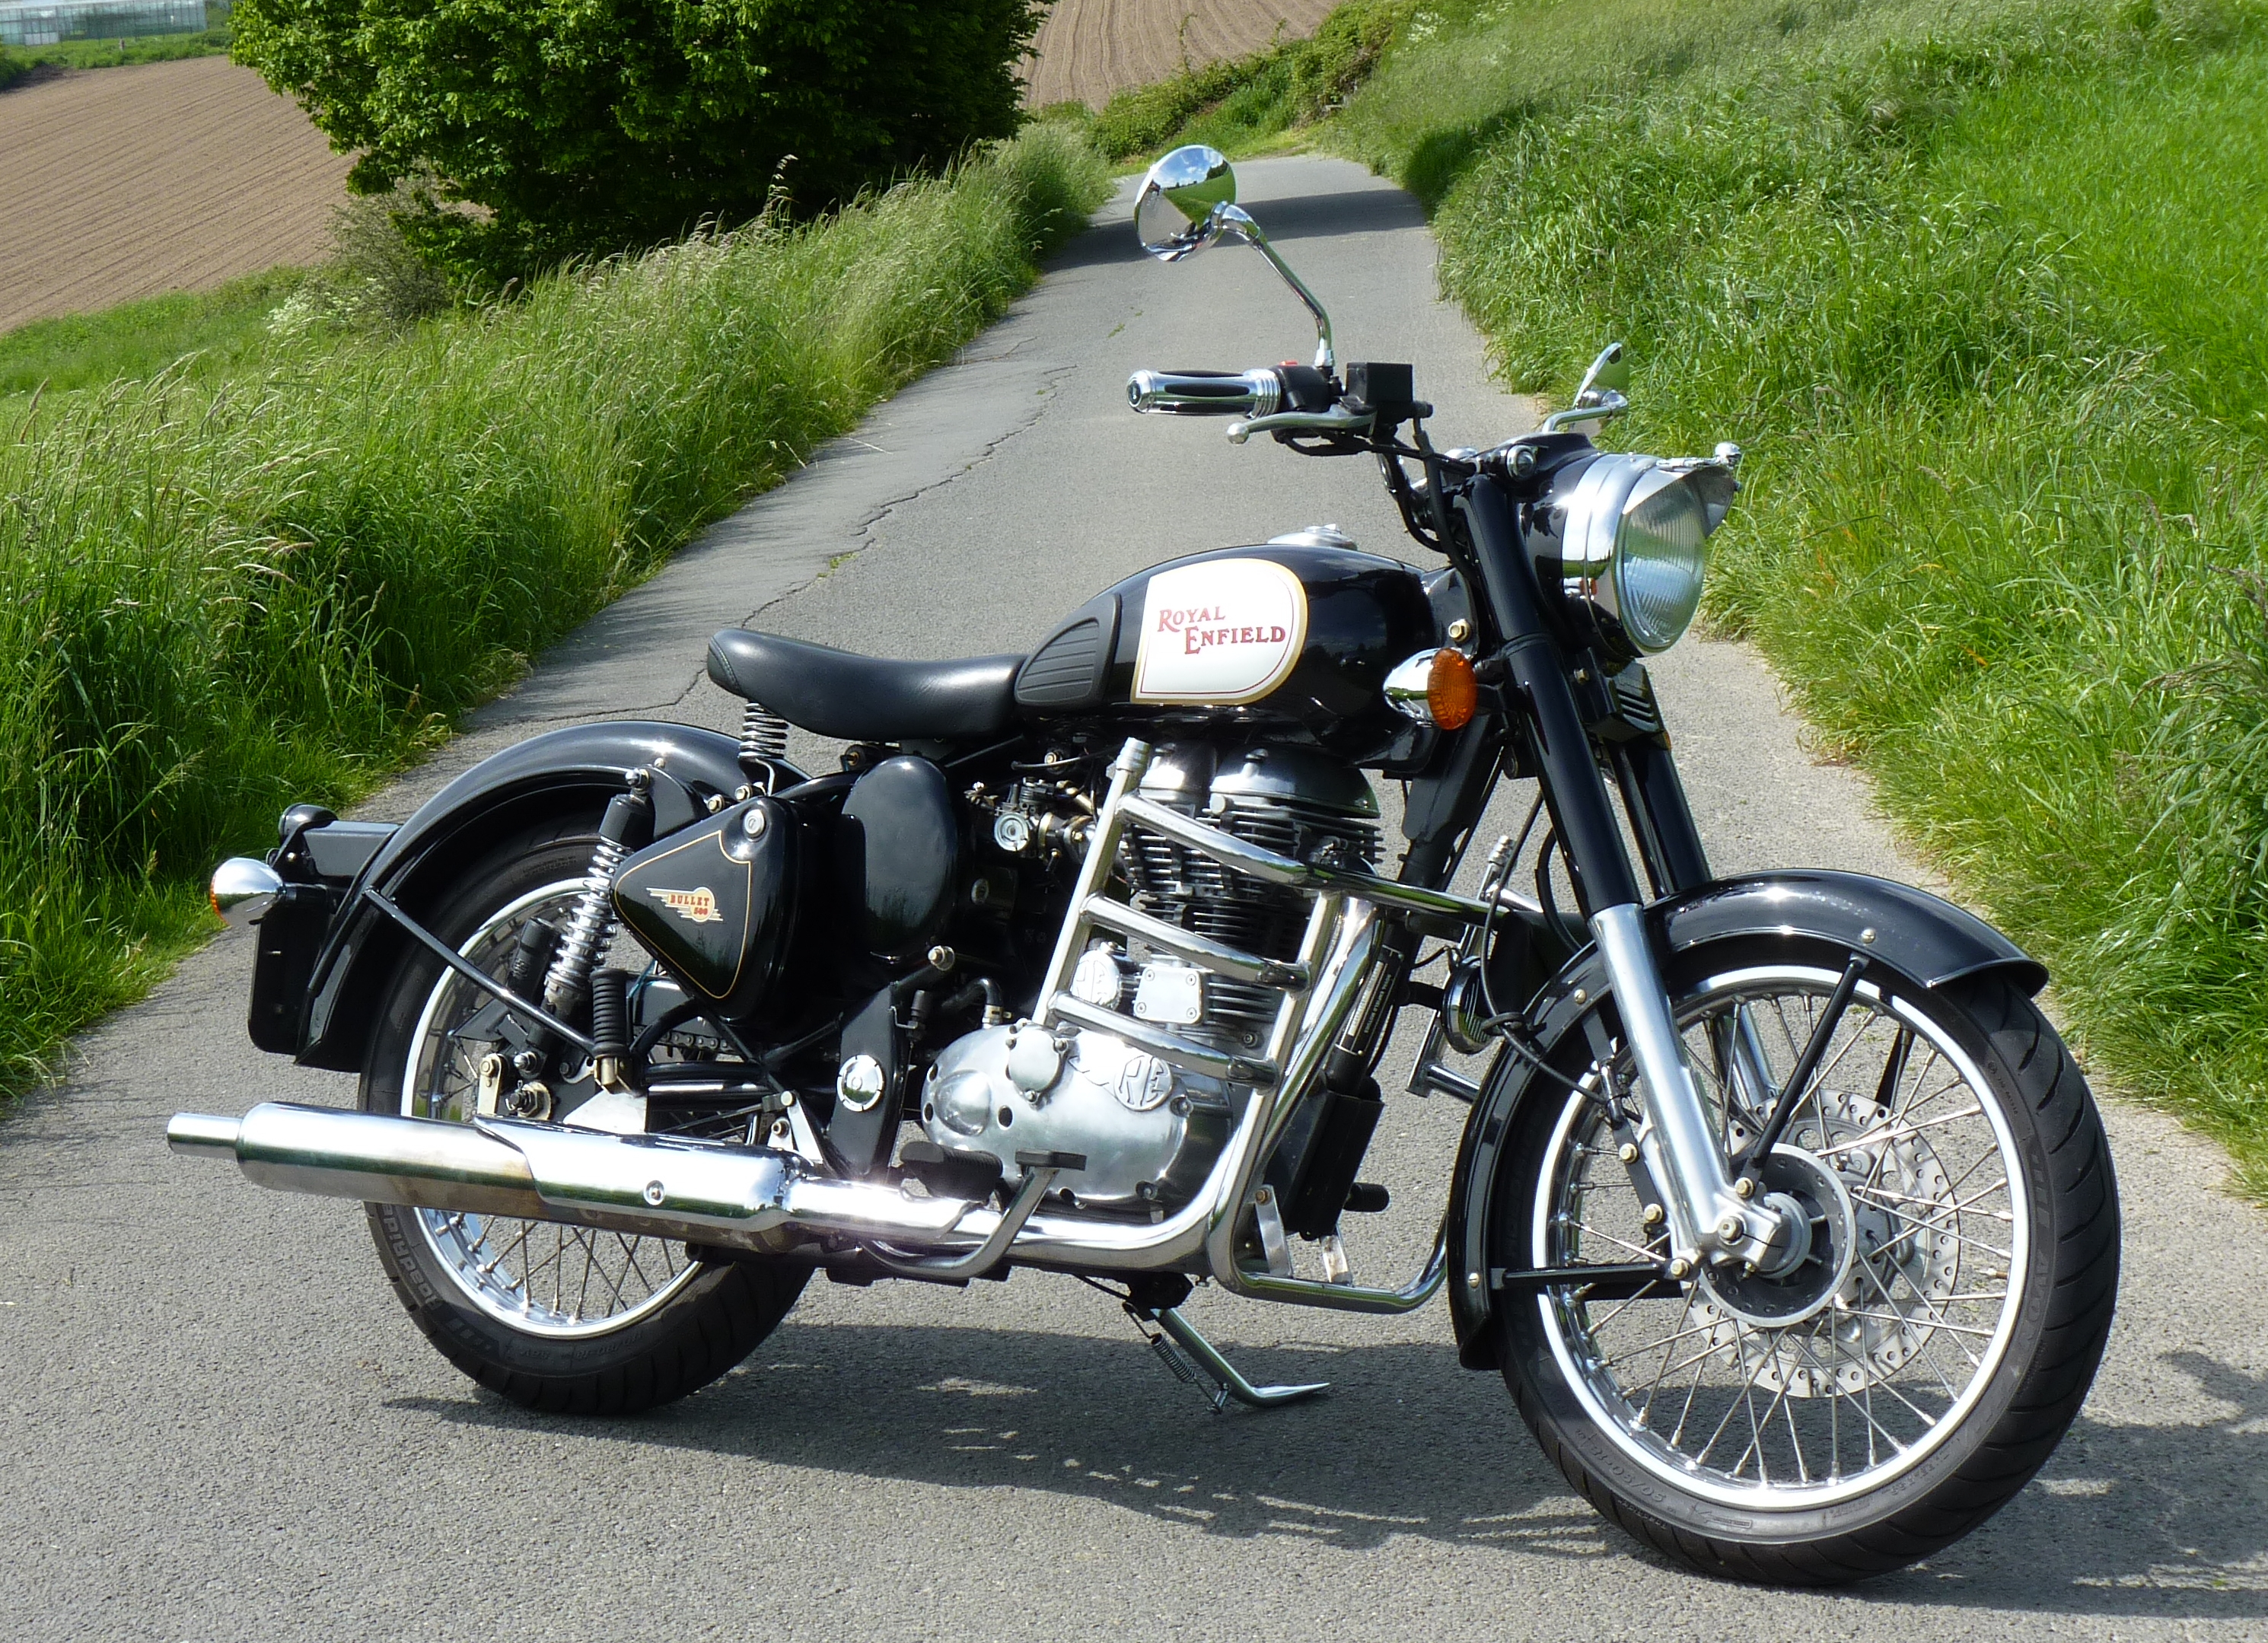 File:Royal Enfield Bullet Classic 500.jpg - Wikimedia Commons